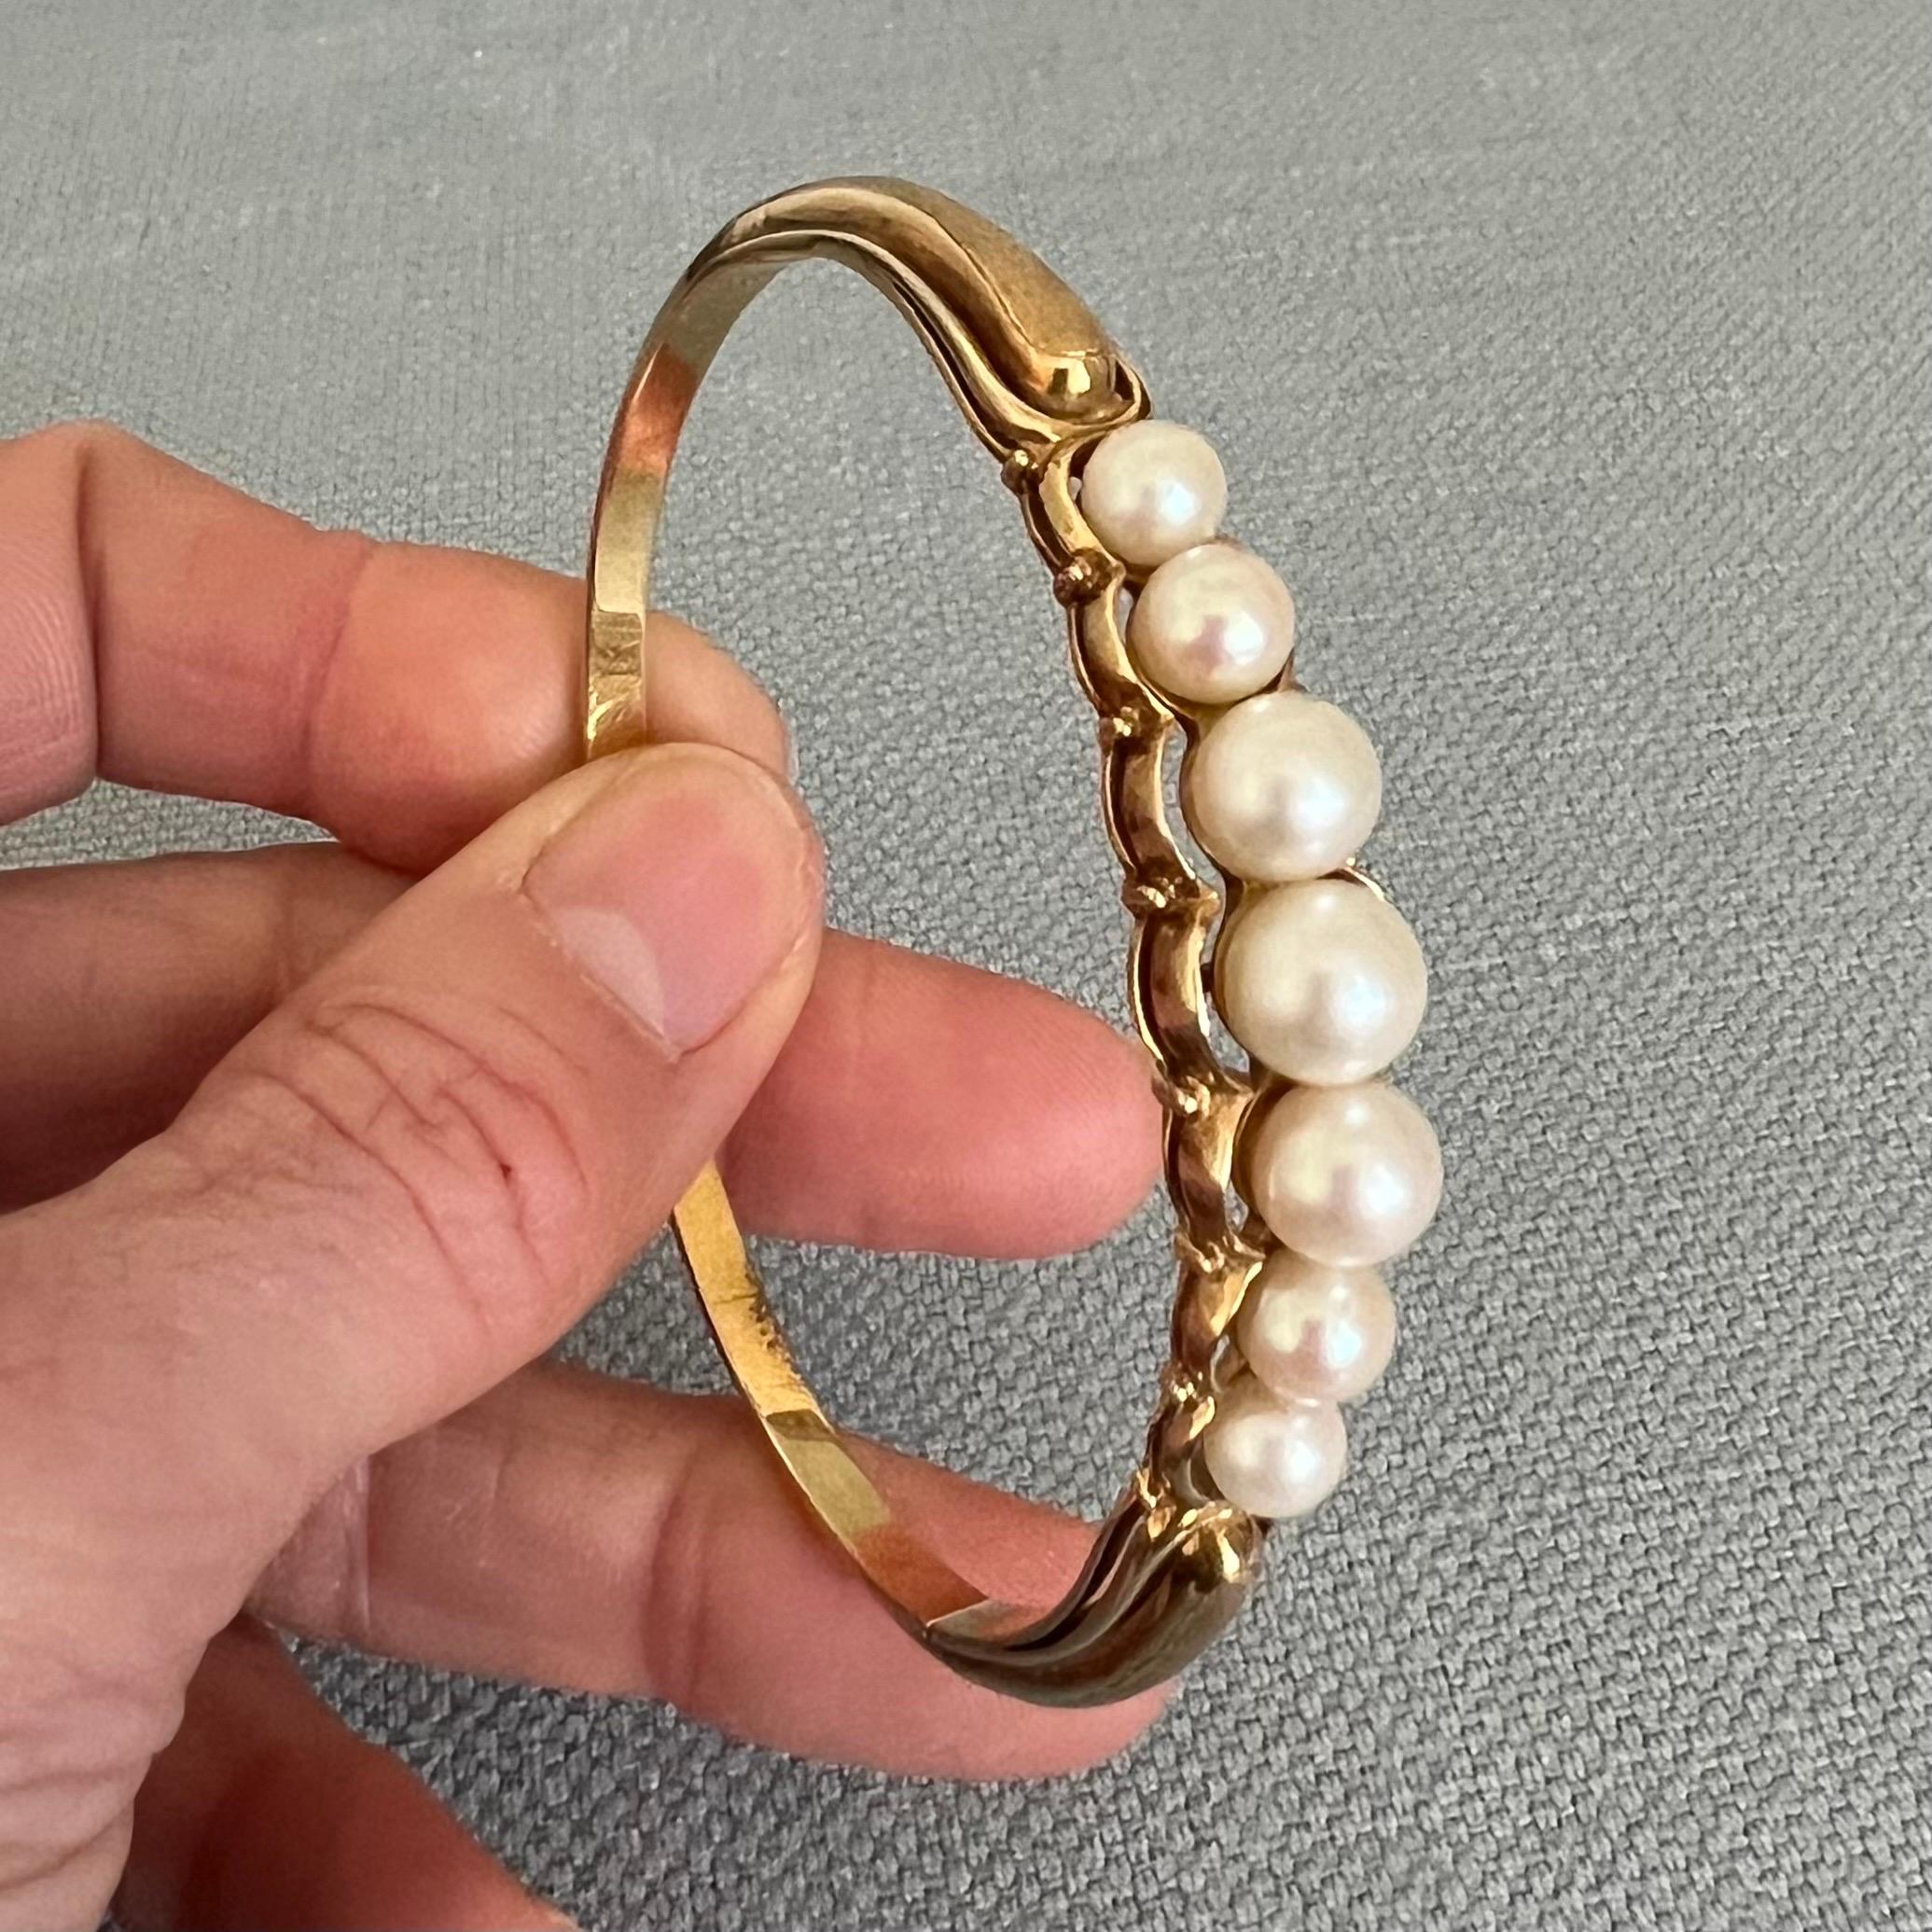 This vintage 14 karat gold pearl bangle bracelet is magnificent! The bracelet features one row of Akoya pearls on a gorgeous made 14 karat gold setting. The bangle is adorned with seven pearls with beautiful luster and shine. The upper part of the